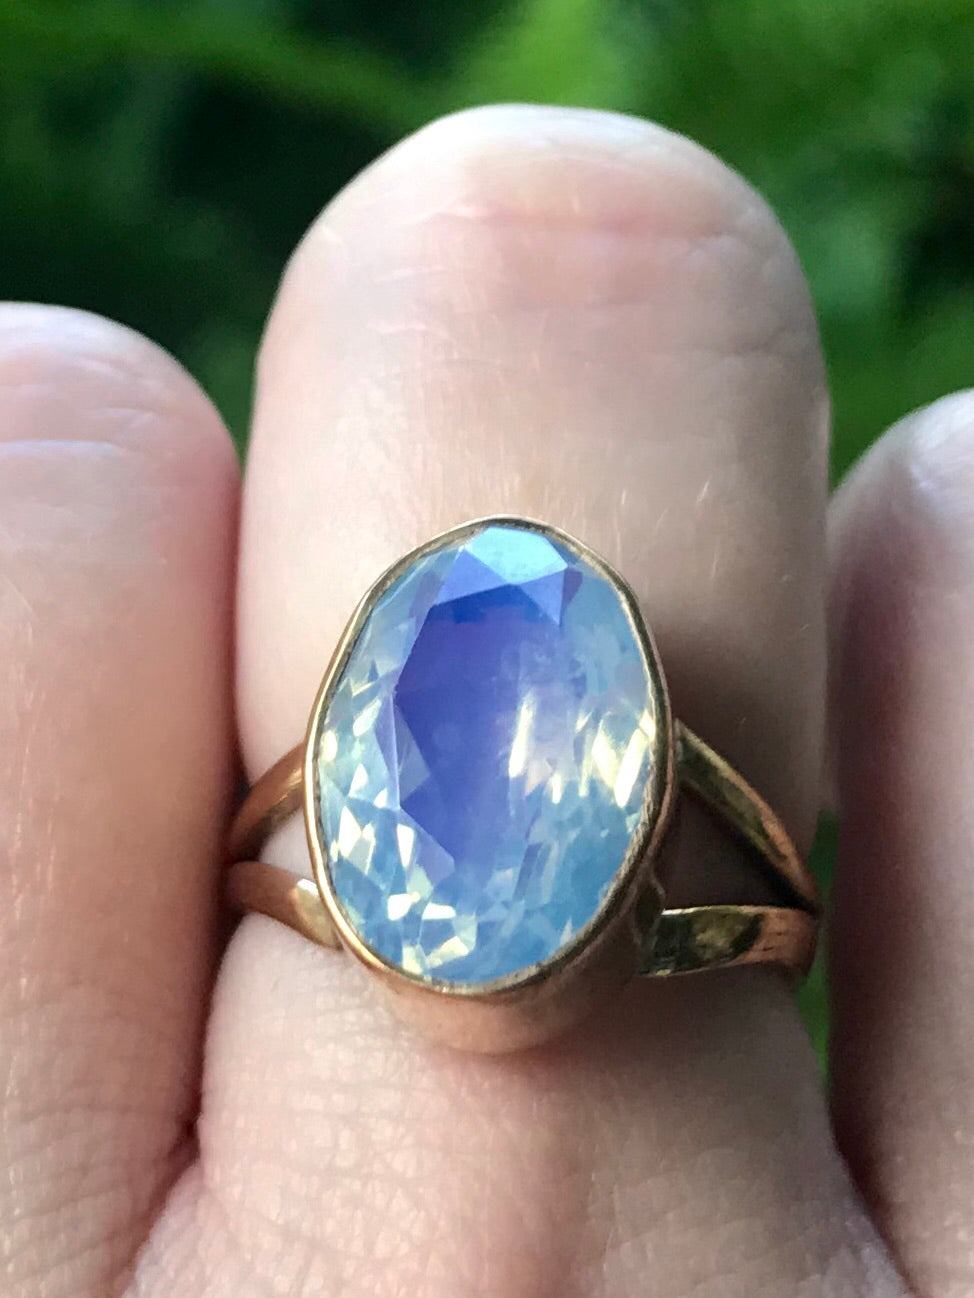 Rose Gold Bronze Opalite Ring Size 7.25 - Morganna’s Treasures 